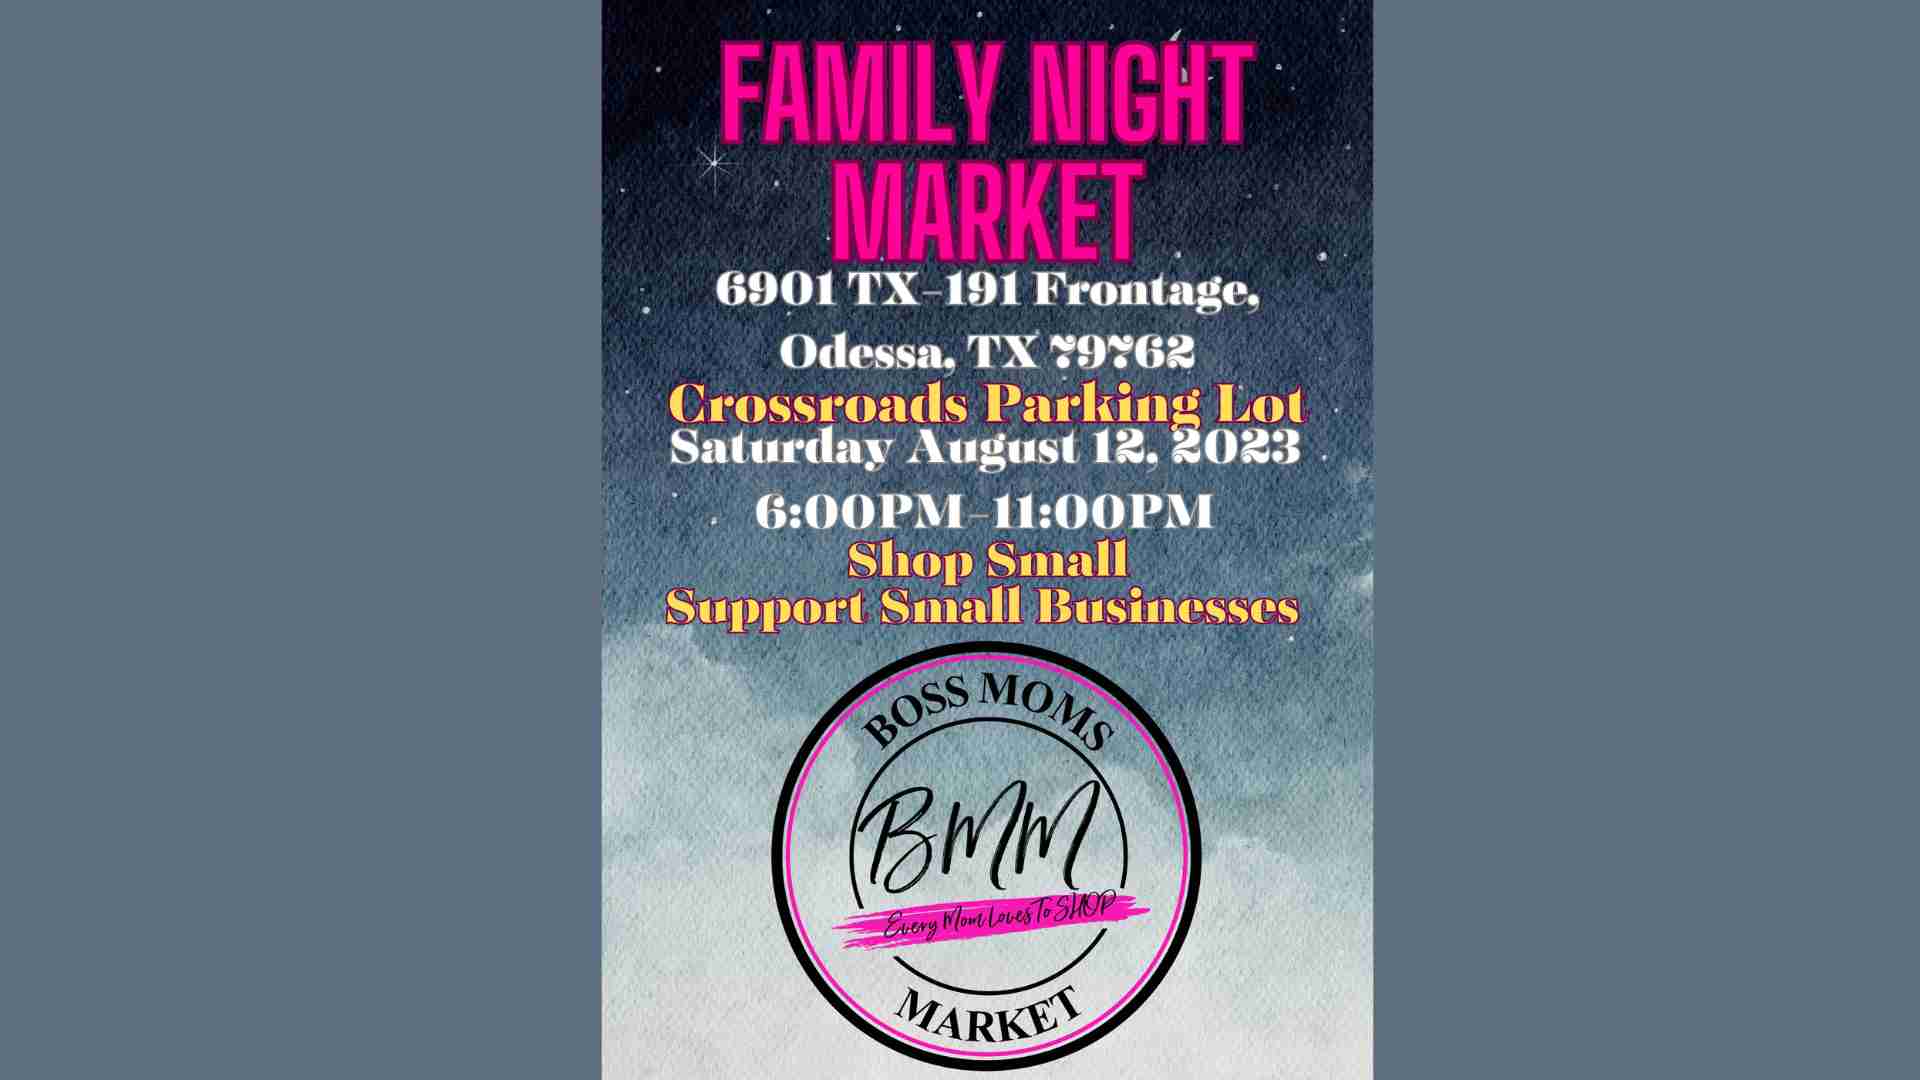 Family Night Market at Crossroads on August 12, 2023 in Odessa, TX